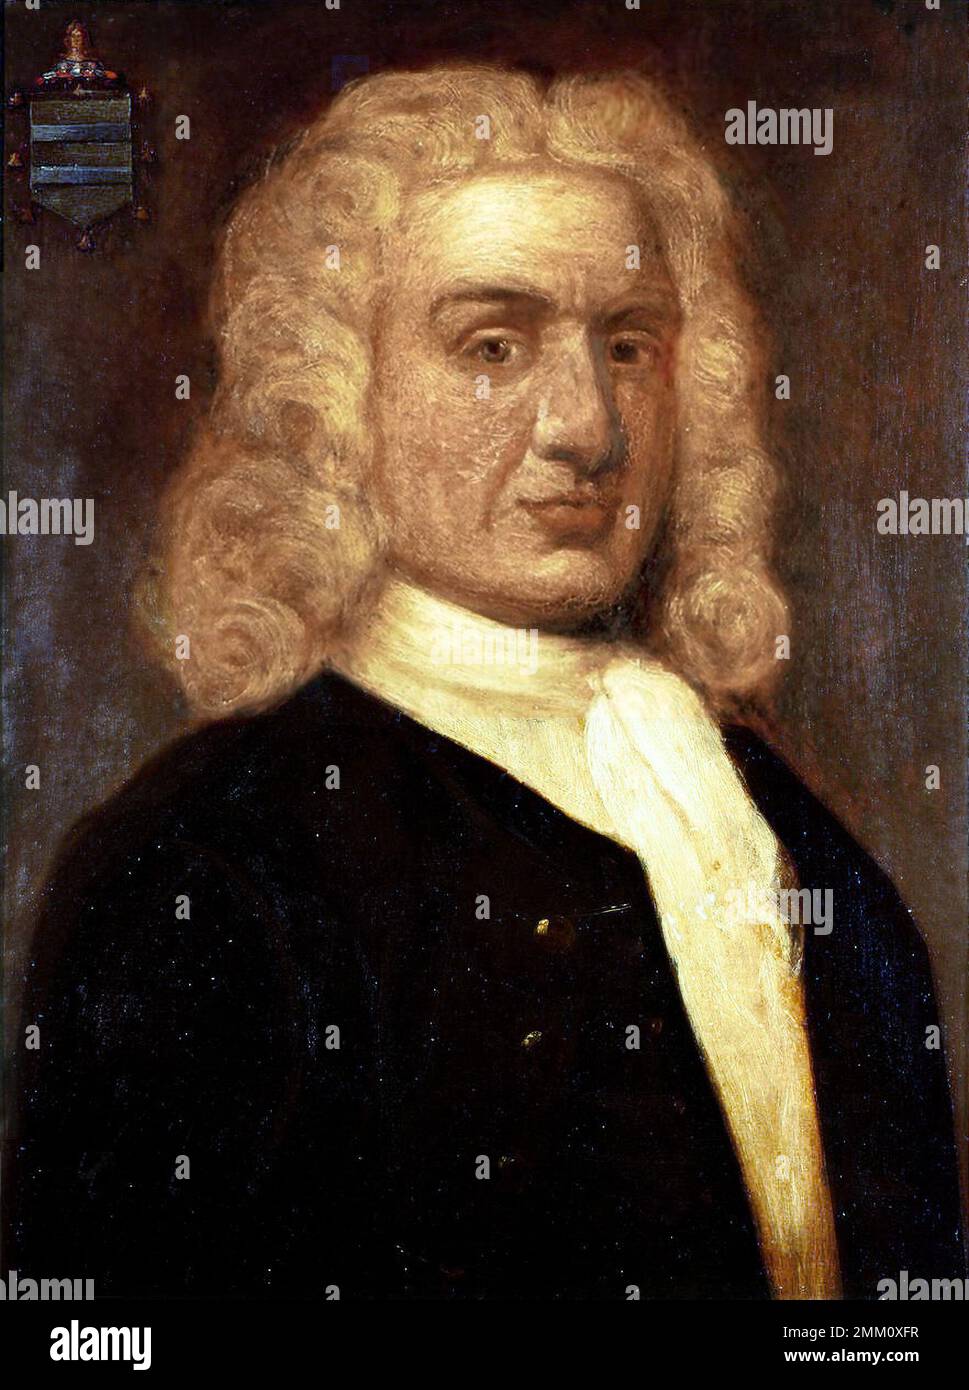 Portrait of William Kidd (c1645-1701) also known as Captain William Kidd or simply Captain Kidd. Scottish privateer and pirate. He was tried and executed in London in 1701 for murder and piracy. Stock Photo